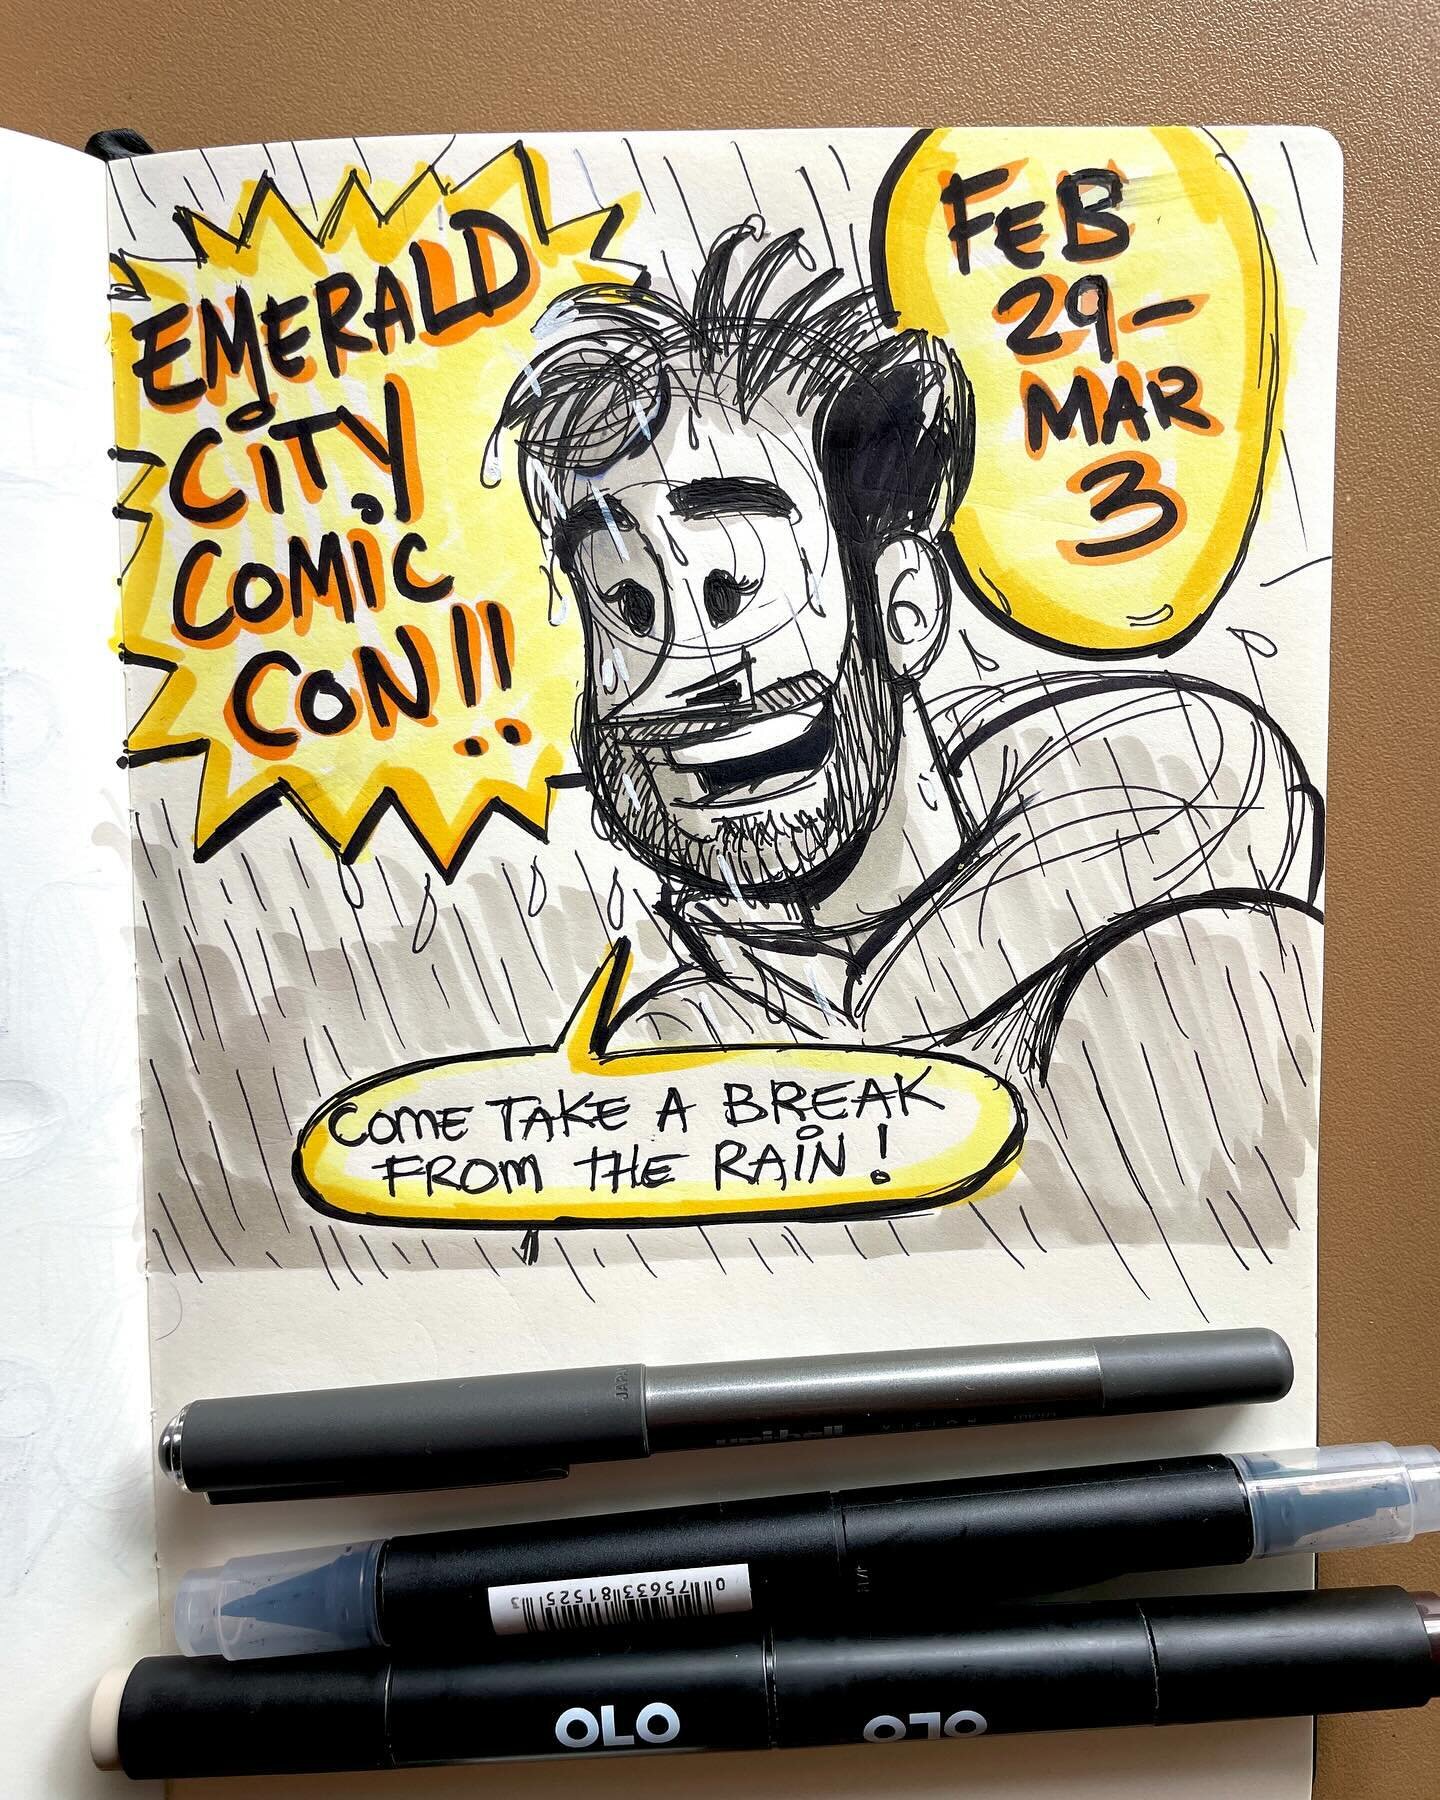 Come find me in Artists Alley this week at @emeraldcitycomiccon !! As usually I&rsquo;ll be torturing @hannahhillam and selling a couple of EXCLUSIVES. Very excited to be making my Seattle DeBUTT. 

See you there!